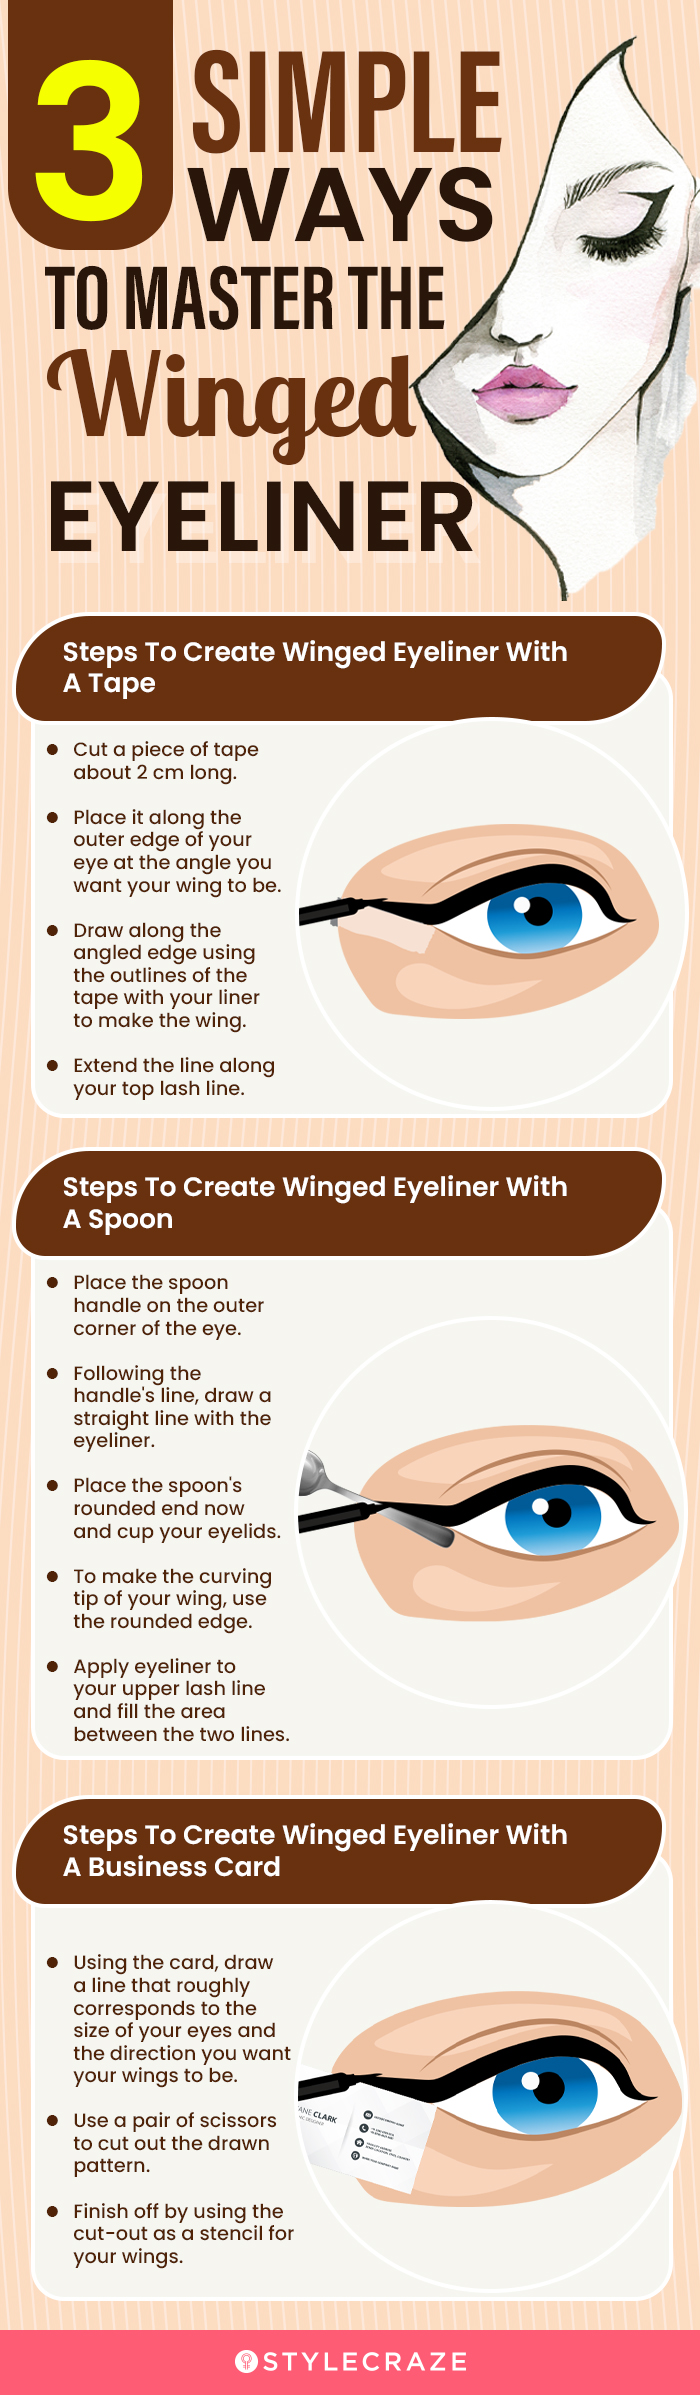 3 simple ways to master the winged eyeliner (infographic)